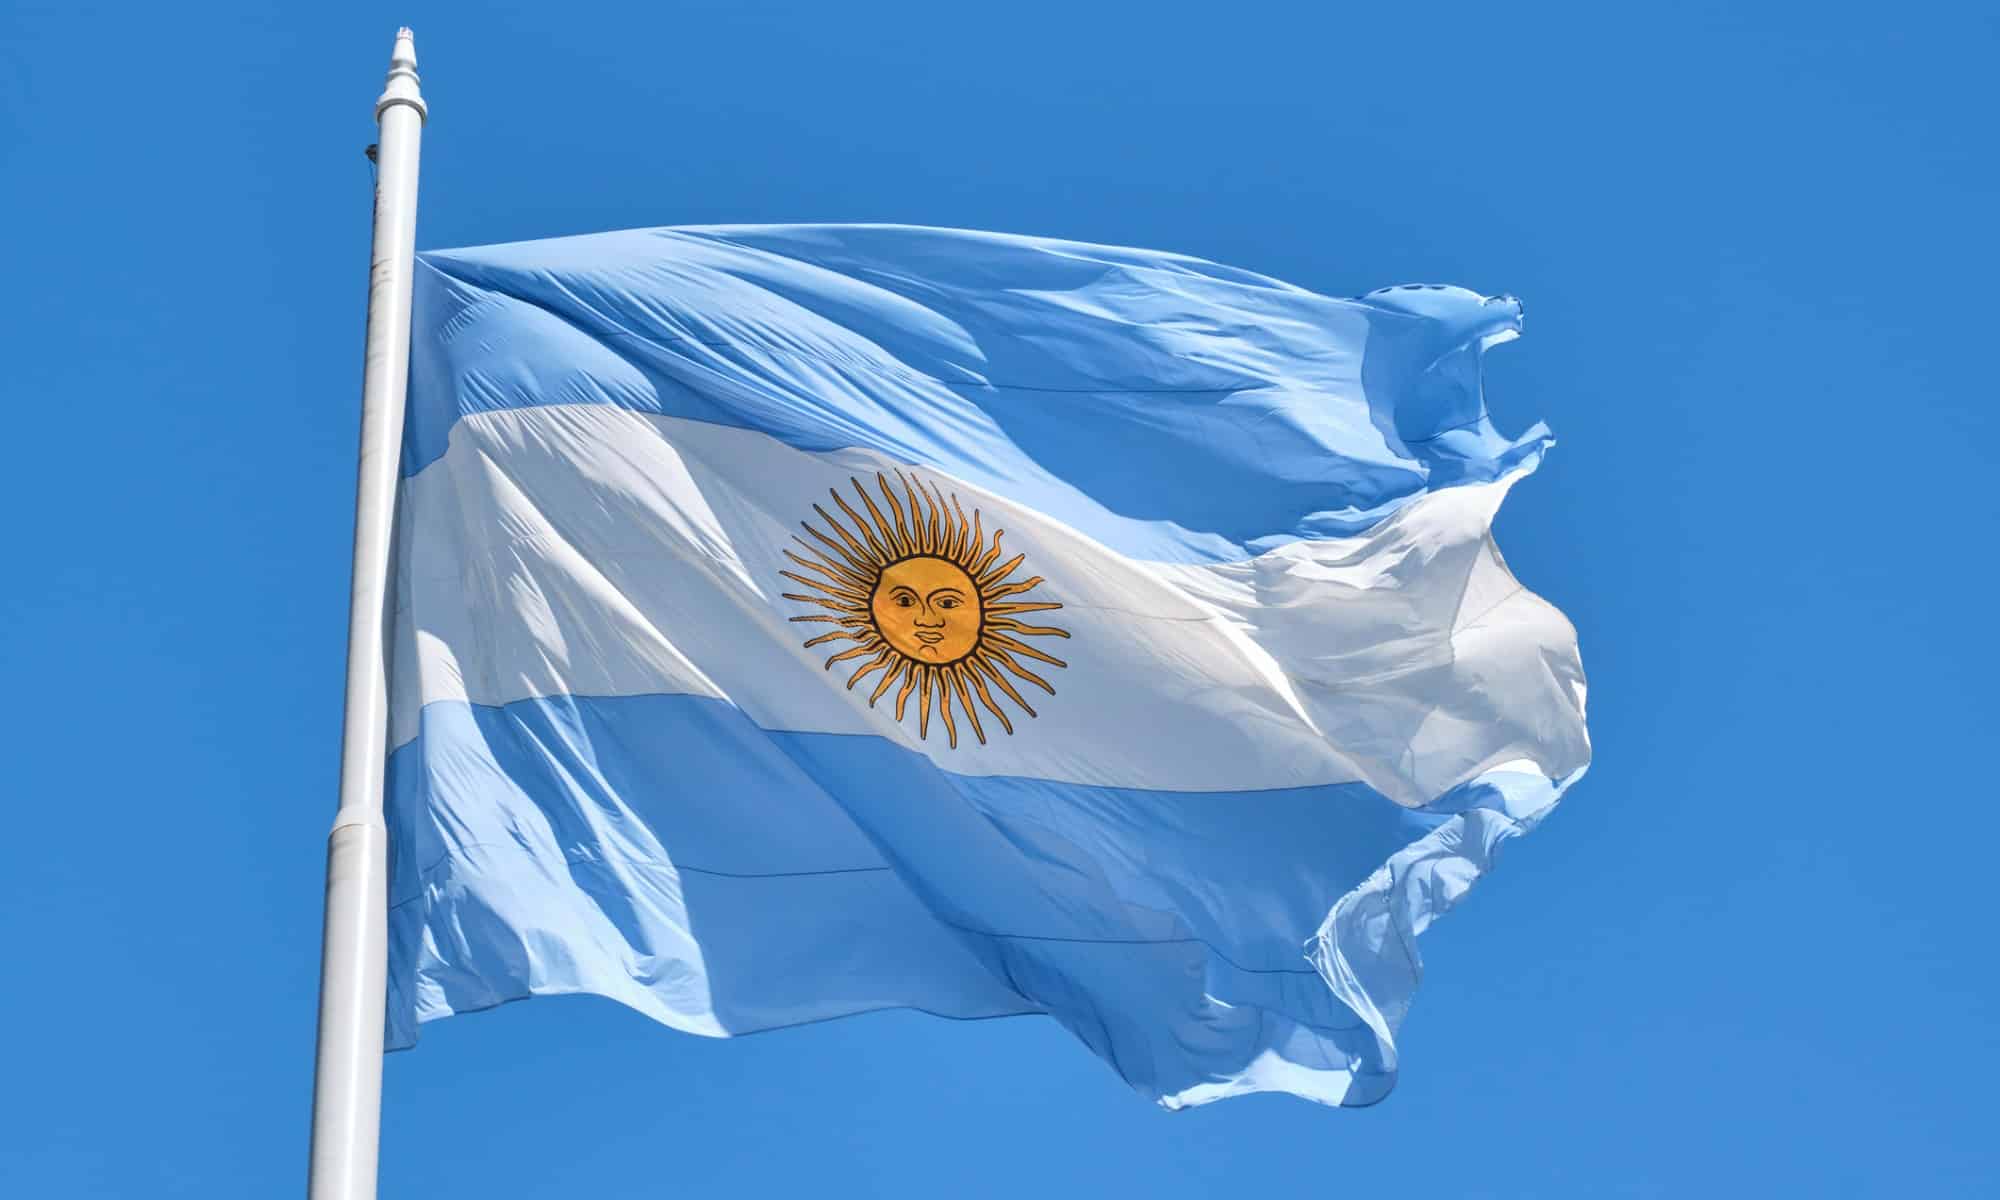 Argentine Flag Flying On A Flagpole On A Sunny Day With Clear Skies  S1024x1024wisk20cAFvXHRY1cxHxHmrZmCVPQndT UJ3ejCM1dNQRs1vSBc 